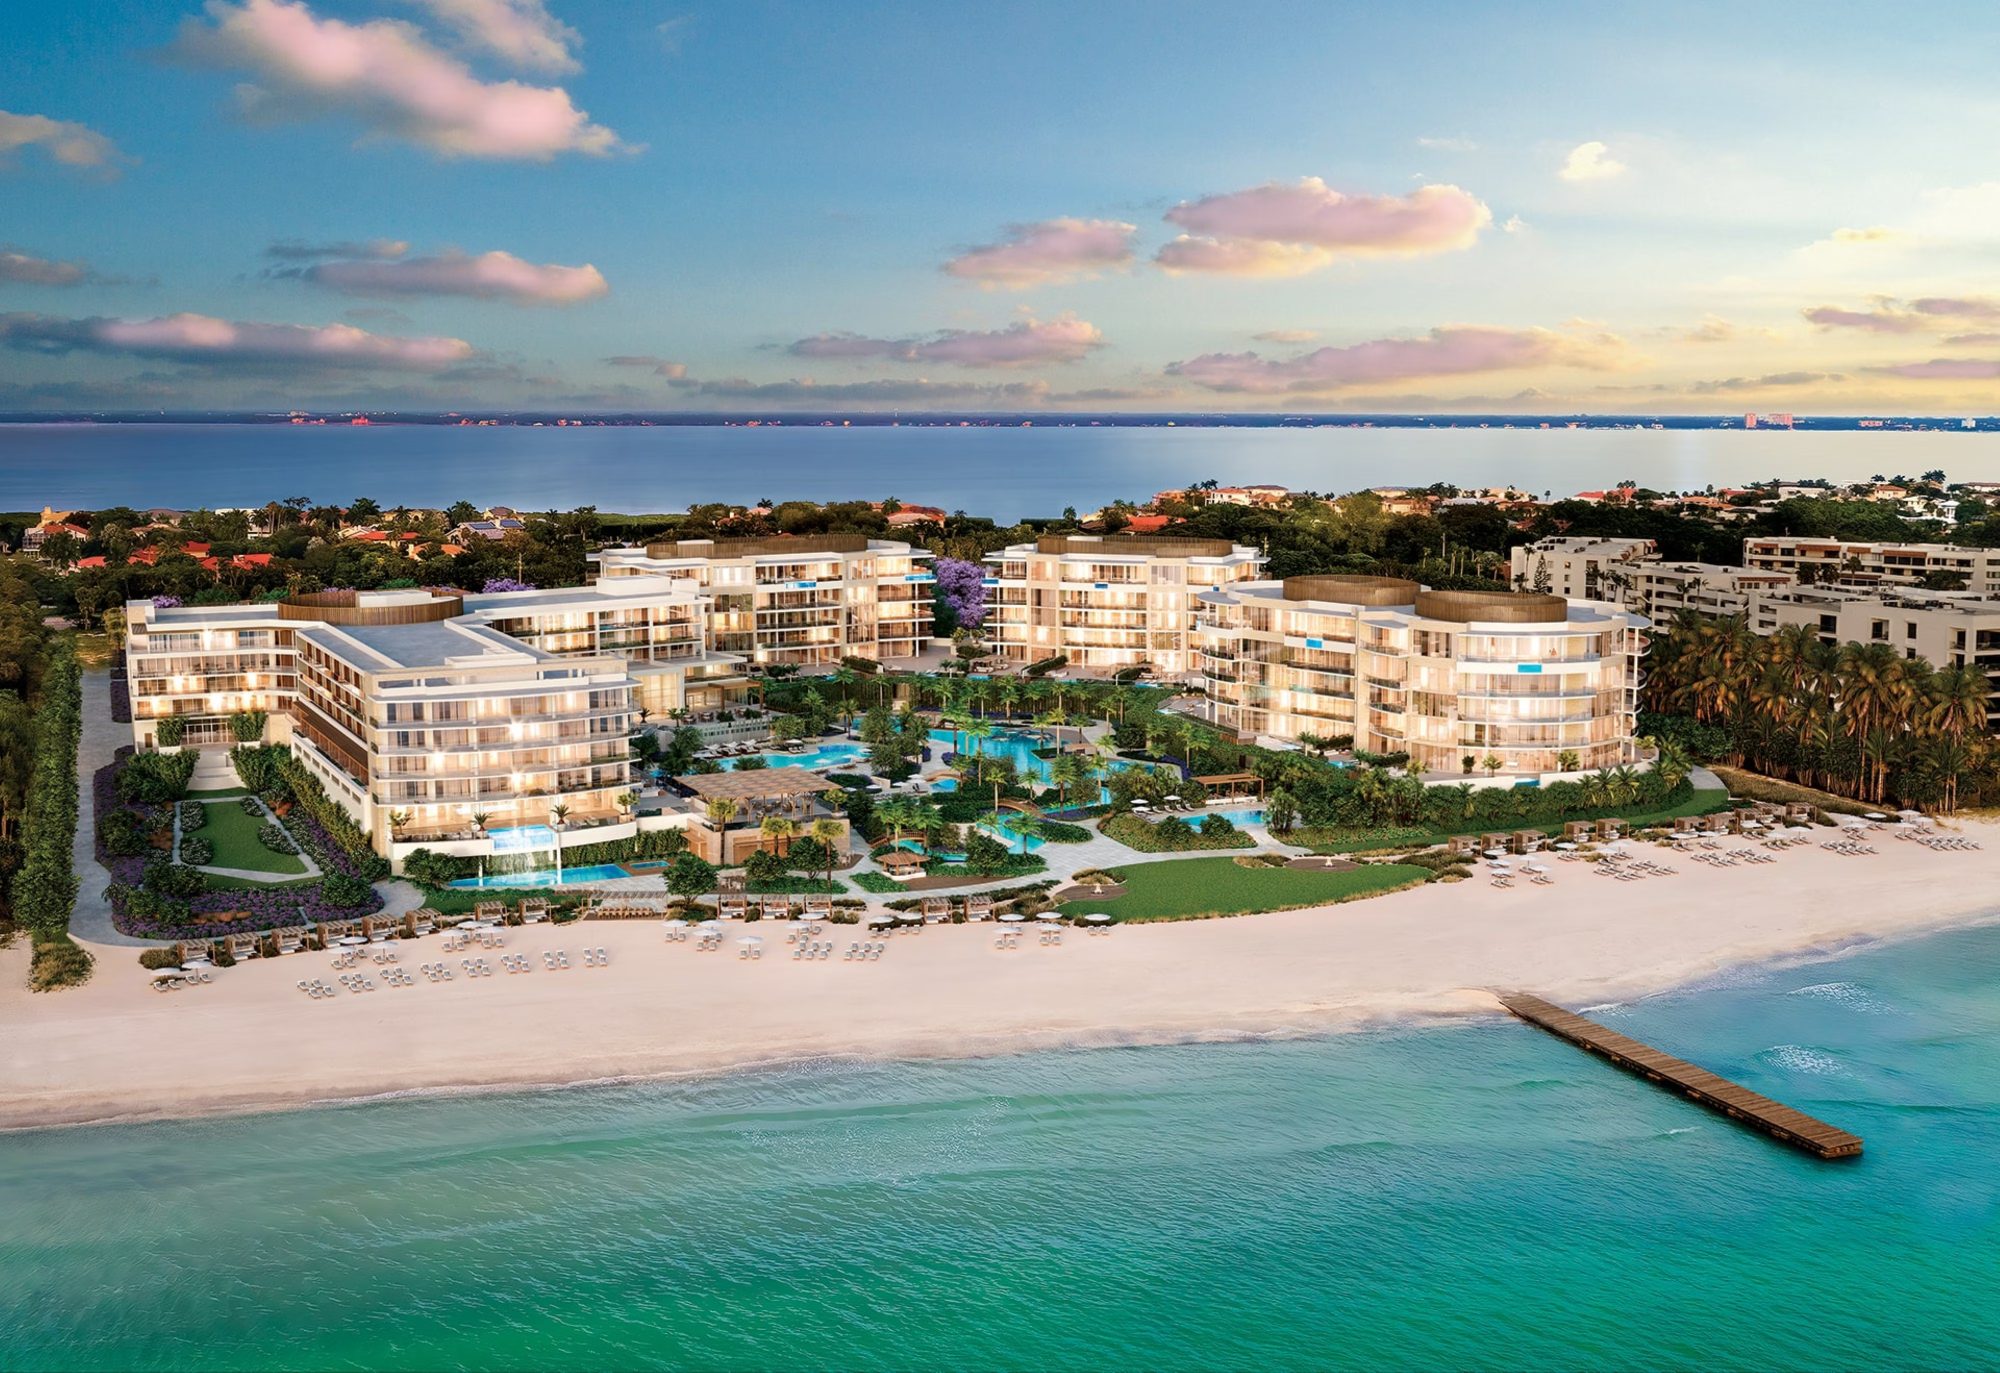 Discover paradise at The St. Regis Longboat Key Resort, set to welcome guests this coming summer